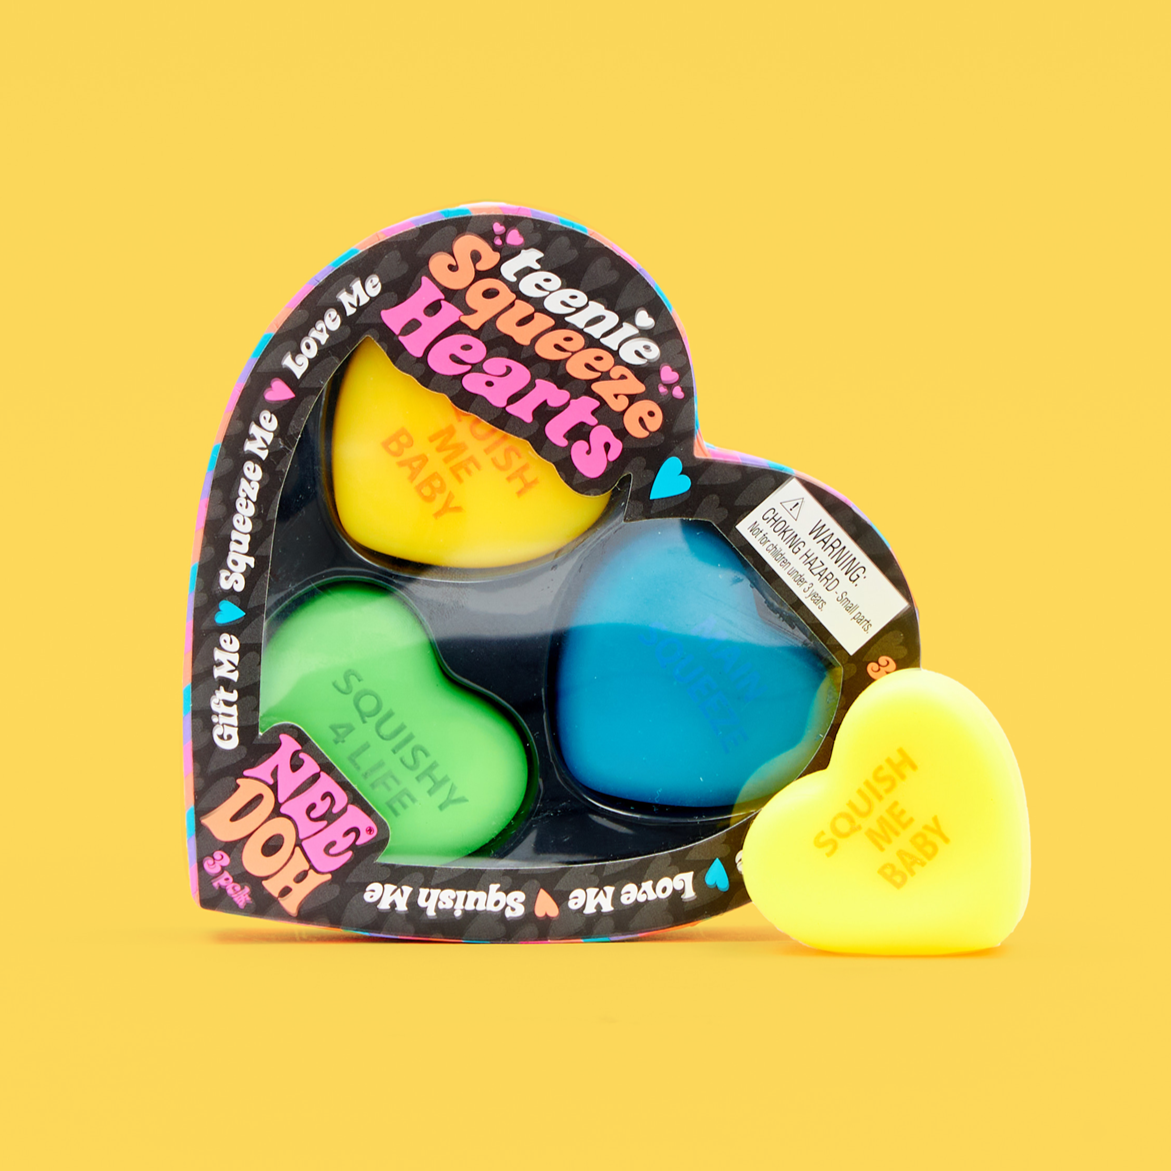 Teenie NeeDoh Squeeze Hearts (Pack of 3),Give your tiny Valentines a little squeeze with our Teenie NeeDoh Squeeze Hearts. These miniature NeeDoh fidget toys come in a pack of three squishable hearts, featuring lovable sayings on the top - just like the classic Love Hearts sweets! Each set of three includes assorted colours and quotes. The perfect gift for Valentine’s Day, these charming squeeze toys come beautifully presented in a heart-shaped box. They are filled with a safe, non-toxic, dough-like materia